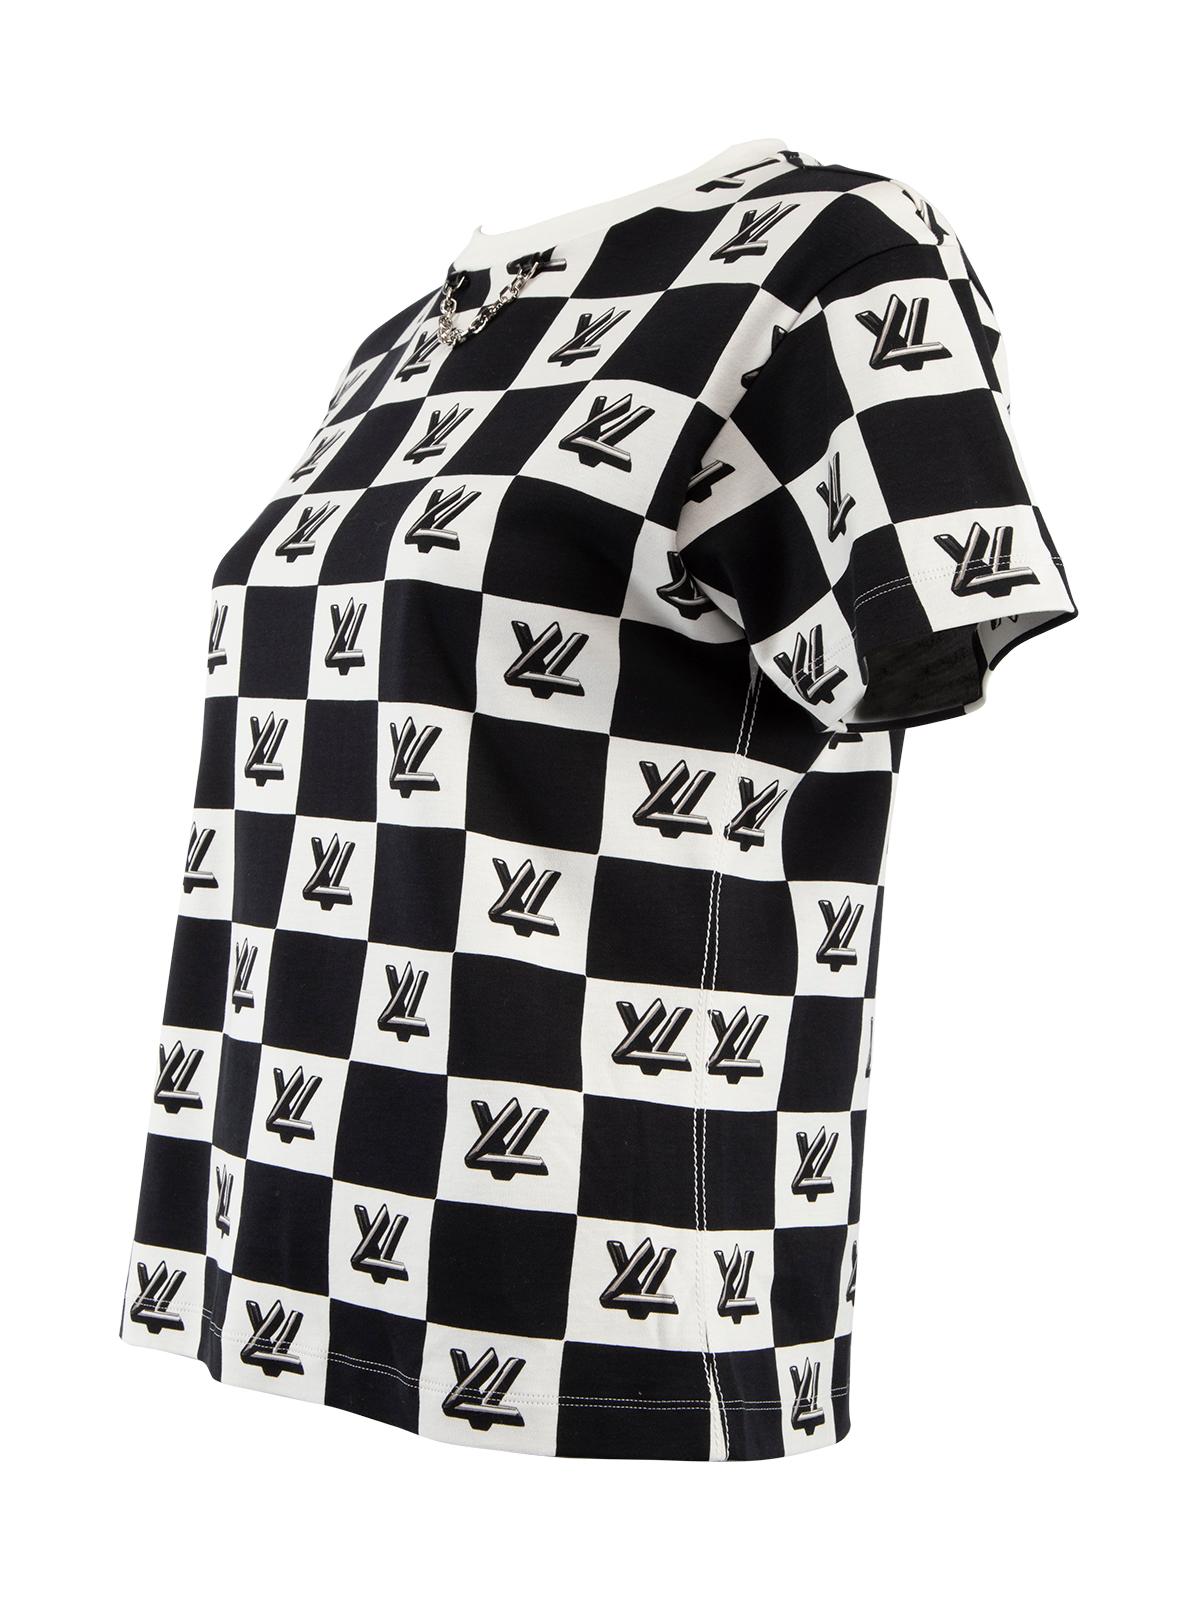 CONDITION is Very good. Hardly any visible wear to top is evident on this used Louis Vuitton designer resale item. Details Black/white Cotton Casual Loose-fit Short sleeves Round neck Chain neck embellishment Checker board pattern Louis Vuitton logo